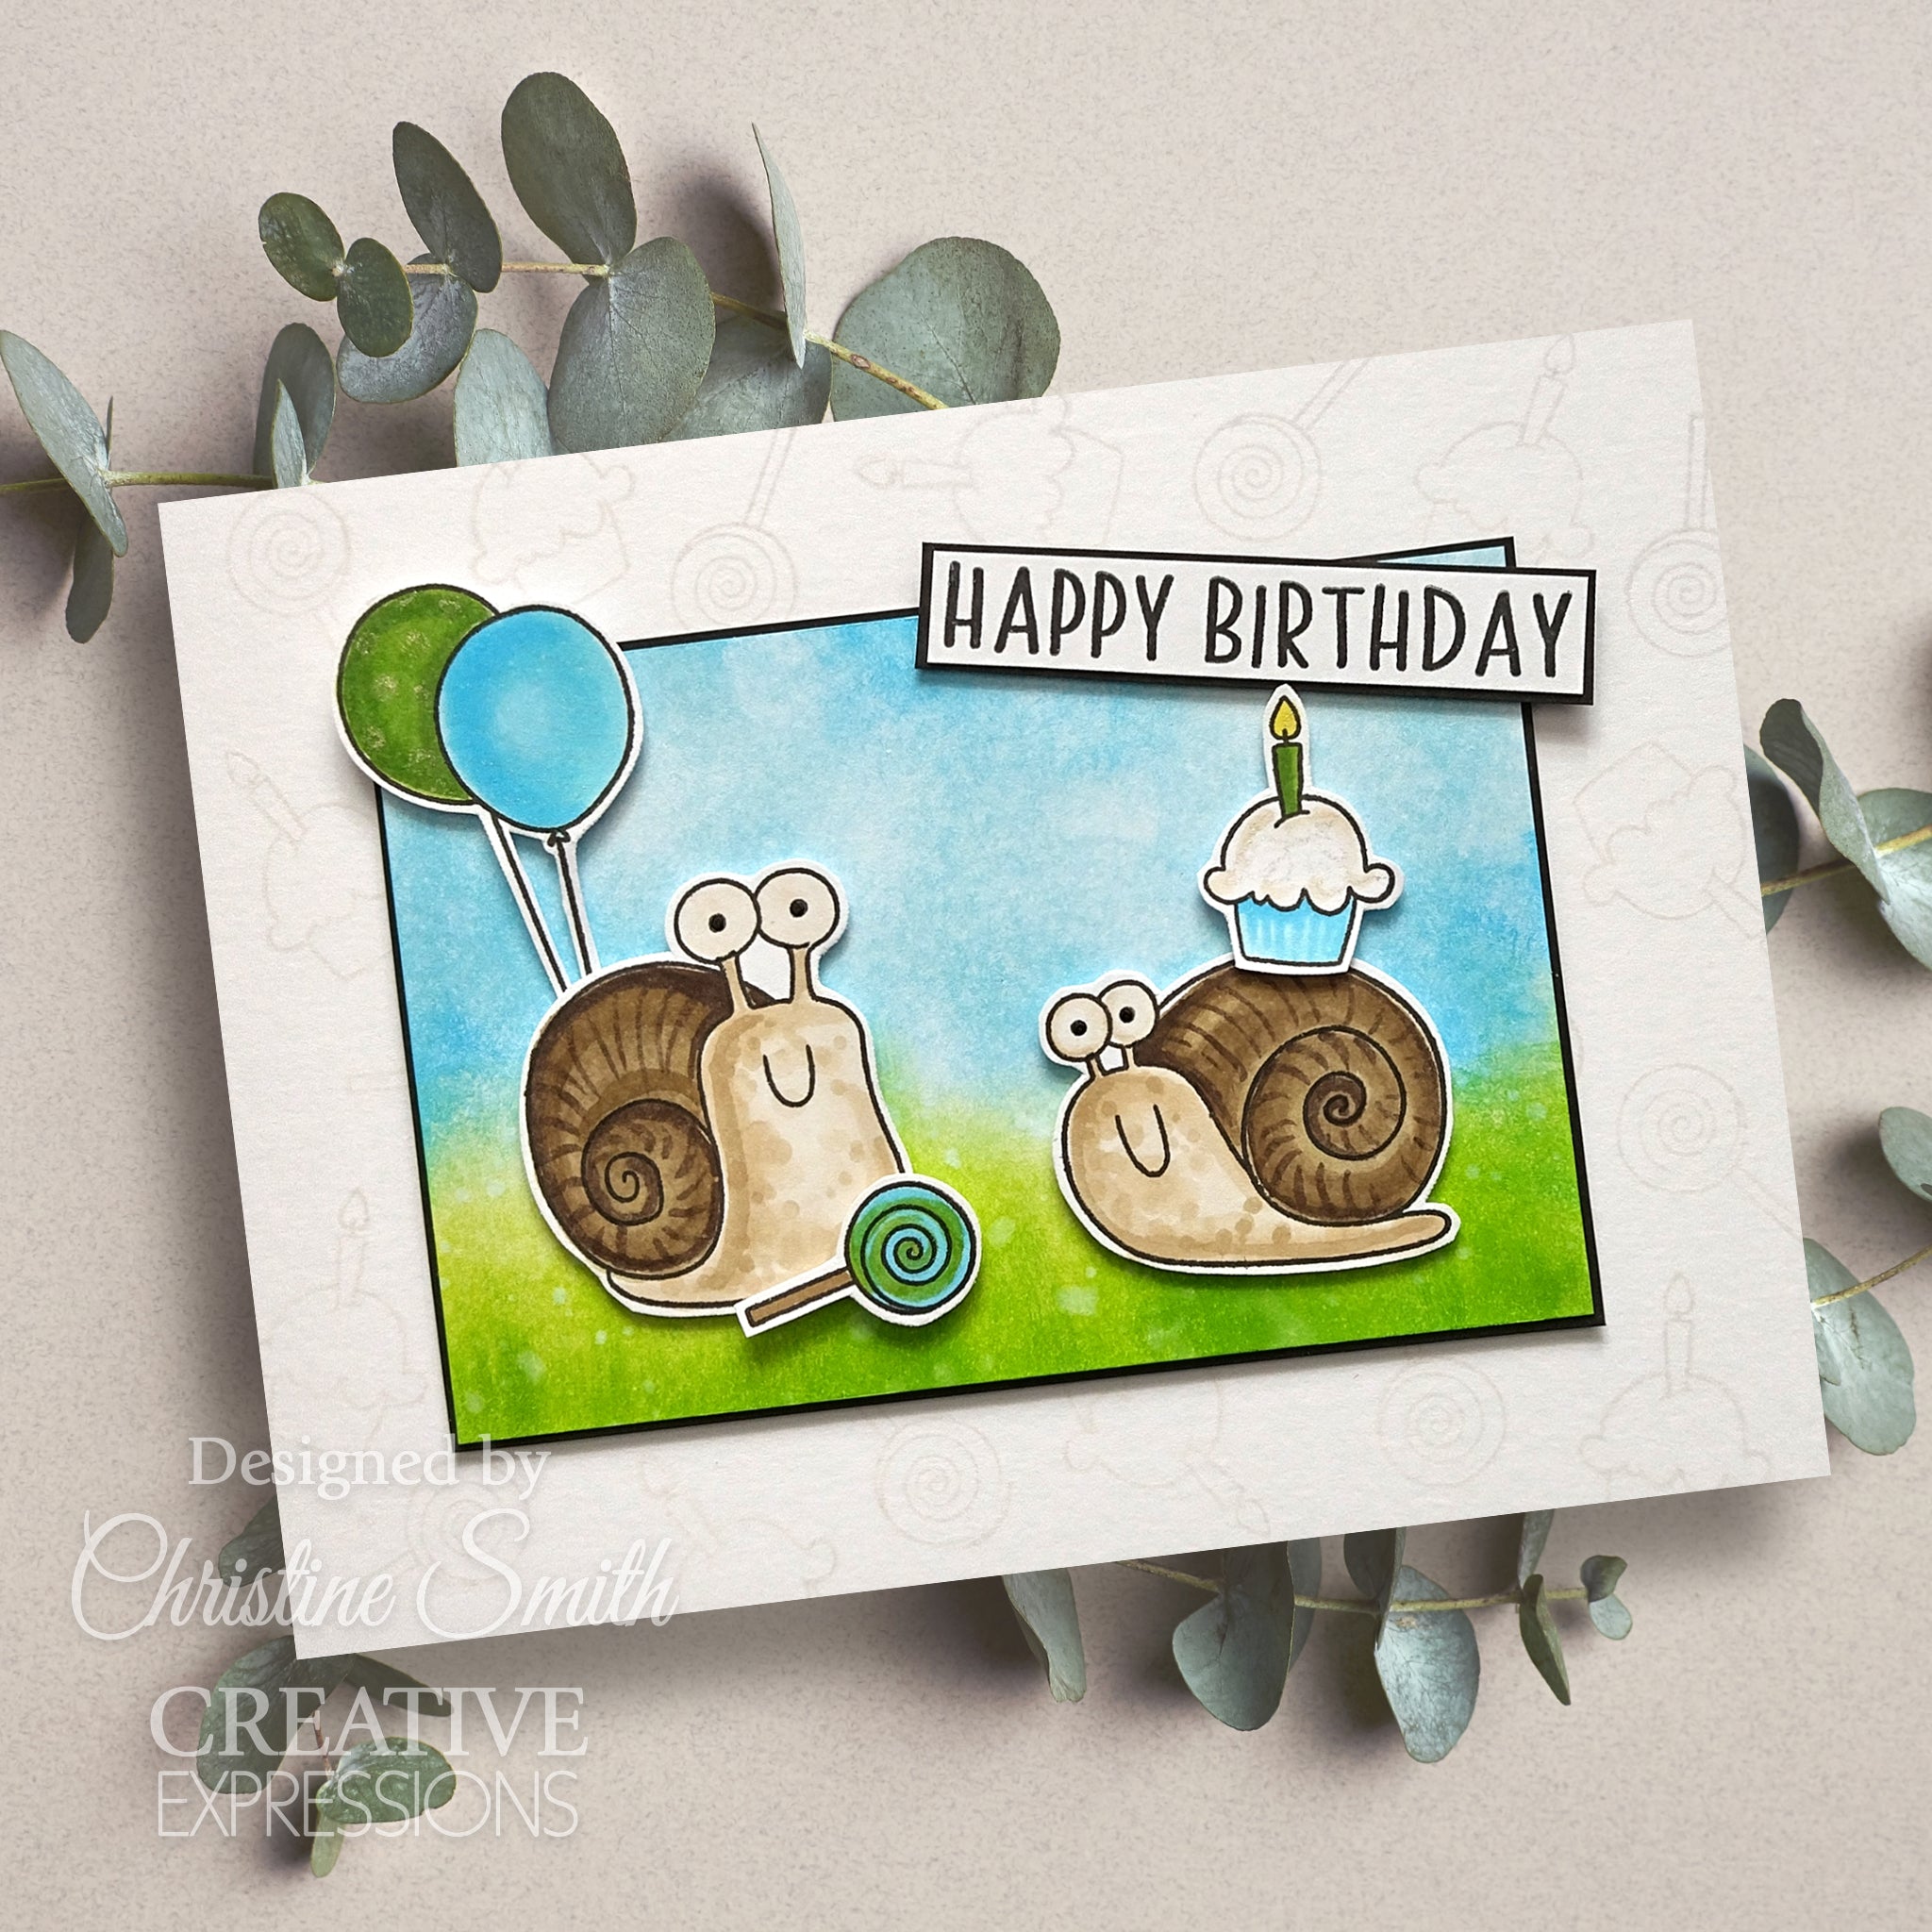 Creative Expressions Jane's Doodles It's Your Day 6 in x 8 in Clear Stamp Set